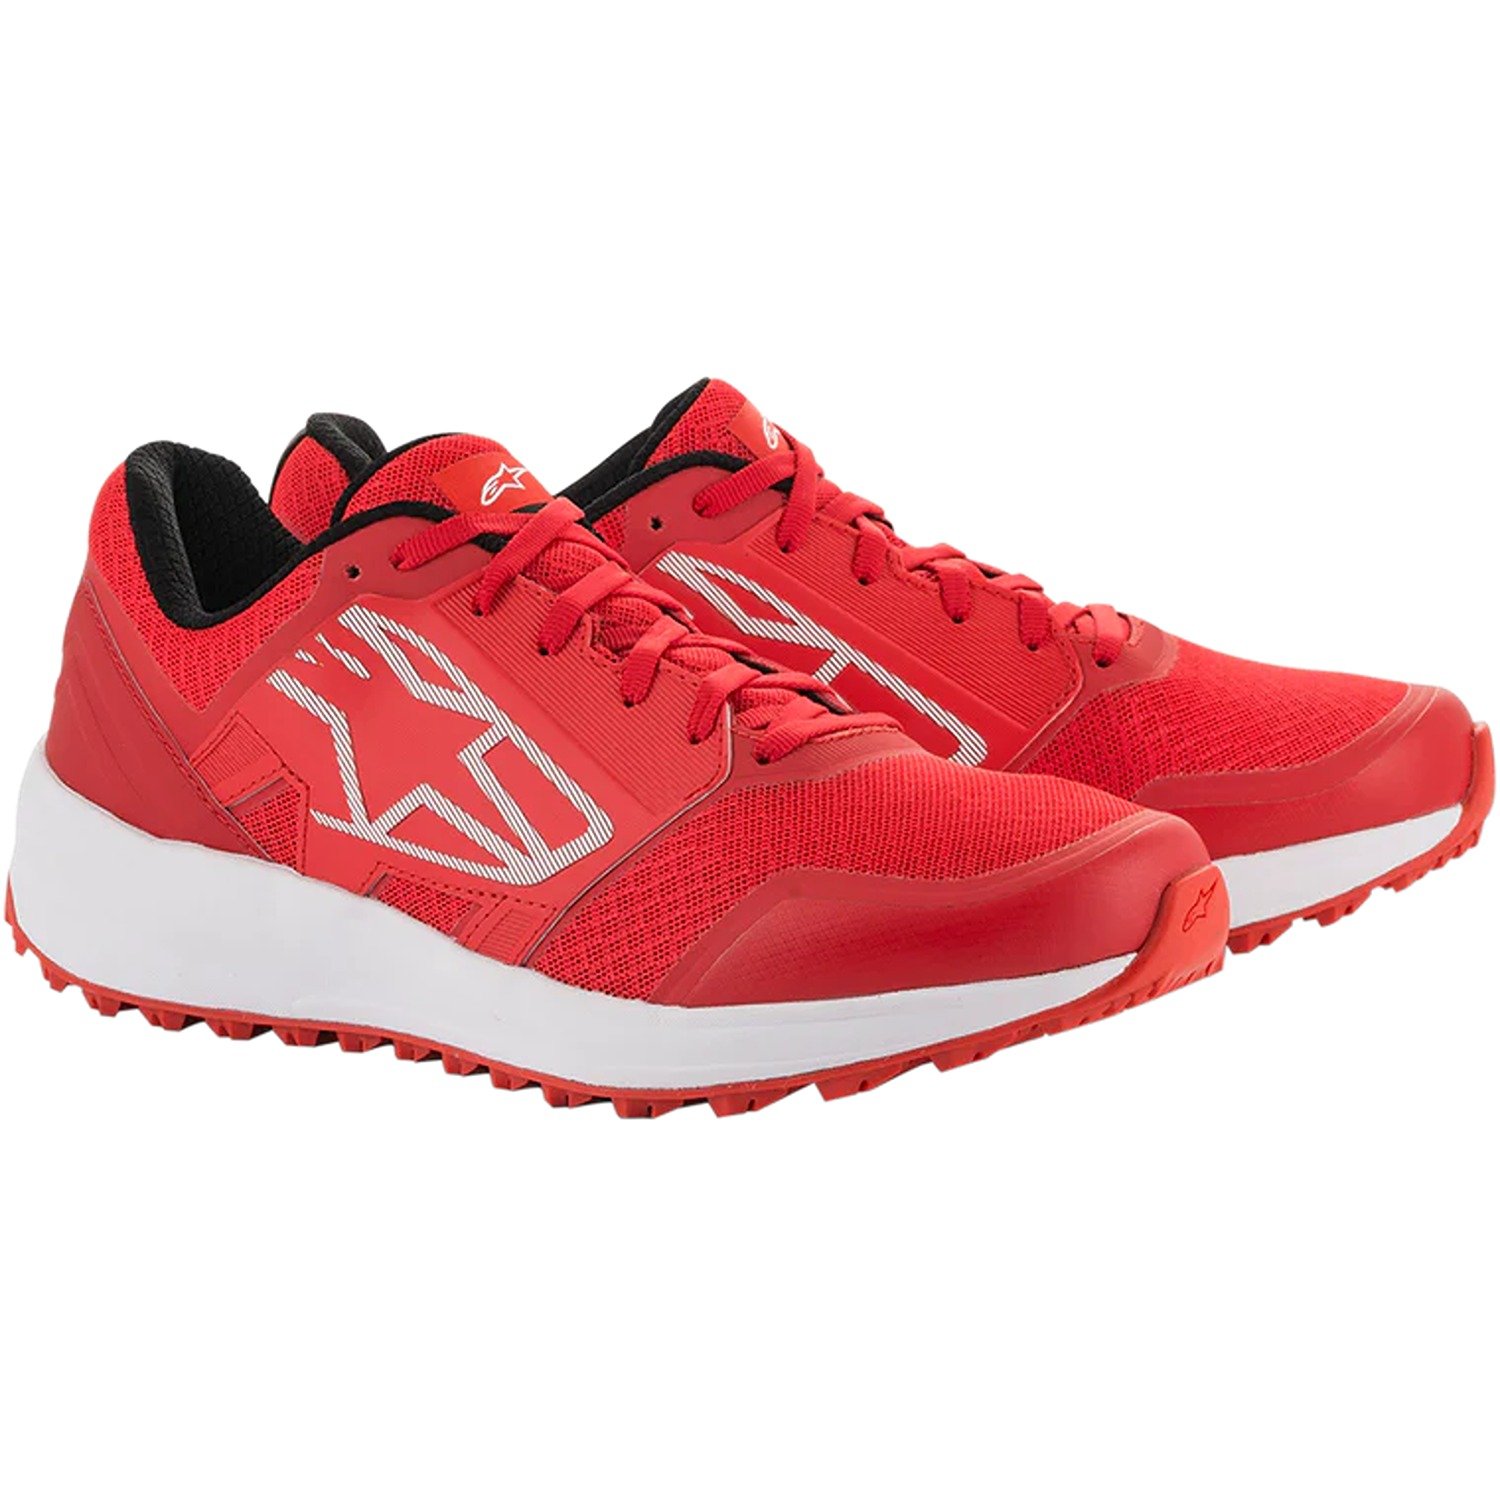 Image of Alpinestars Meta Trail Shoes Red White Taille US 13